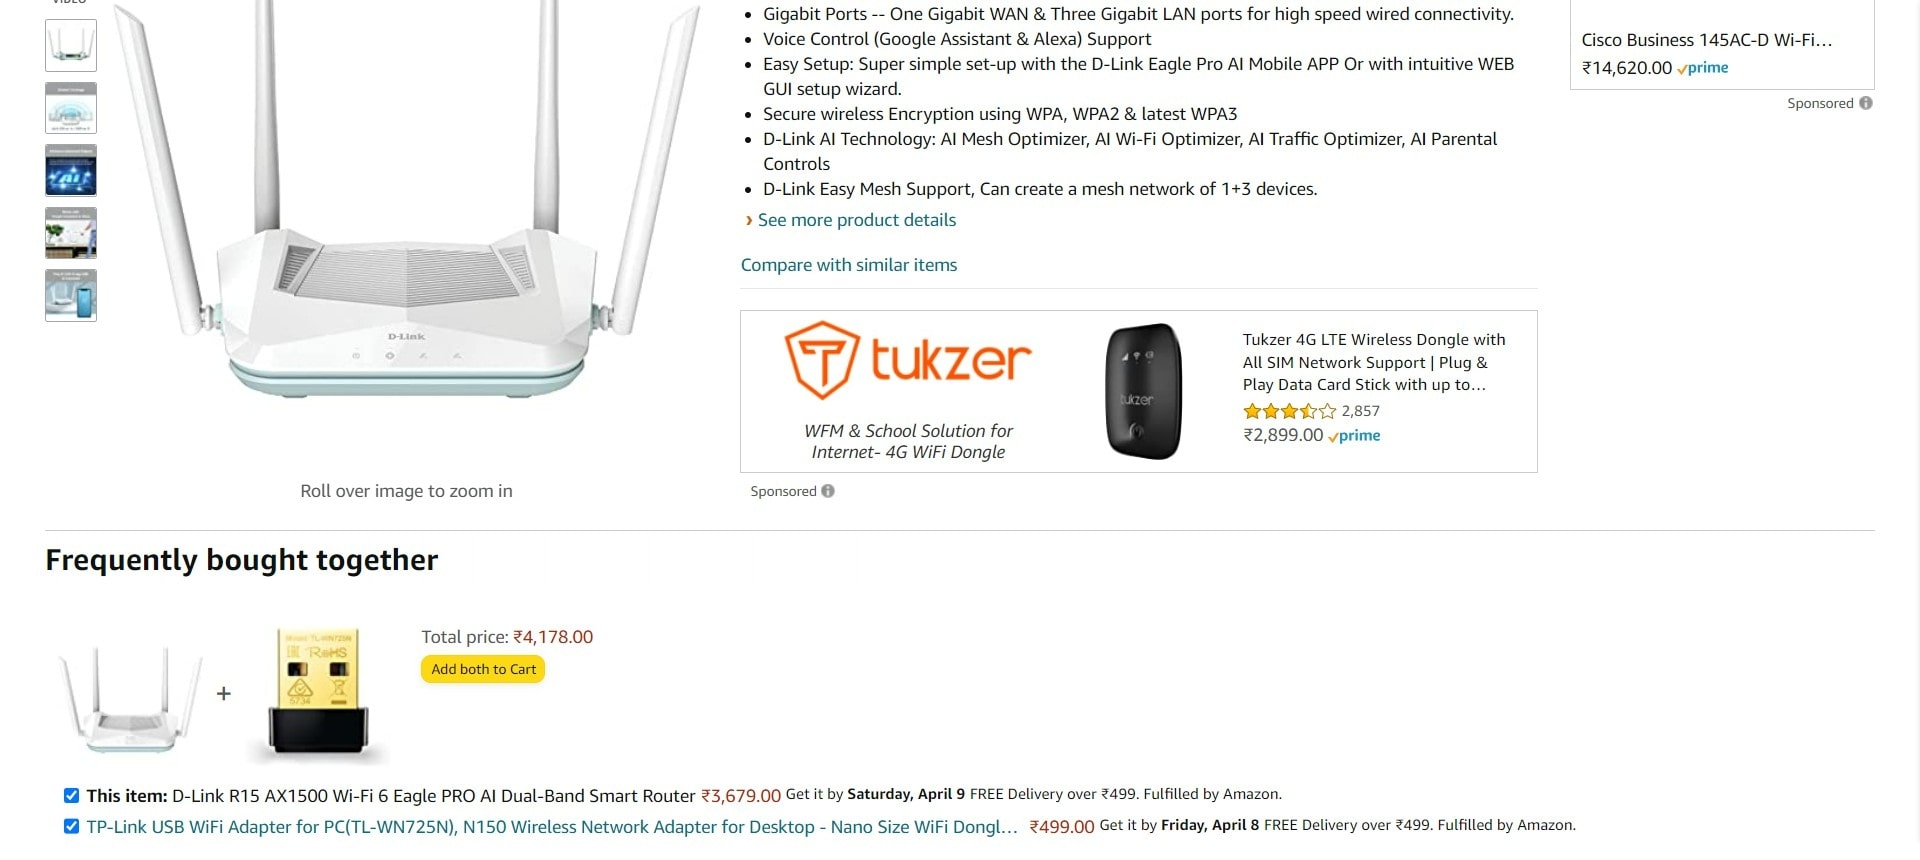 Amazon example for upsell